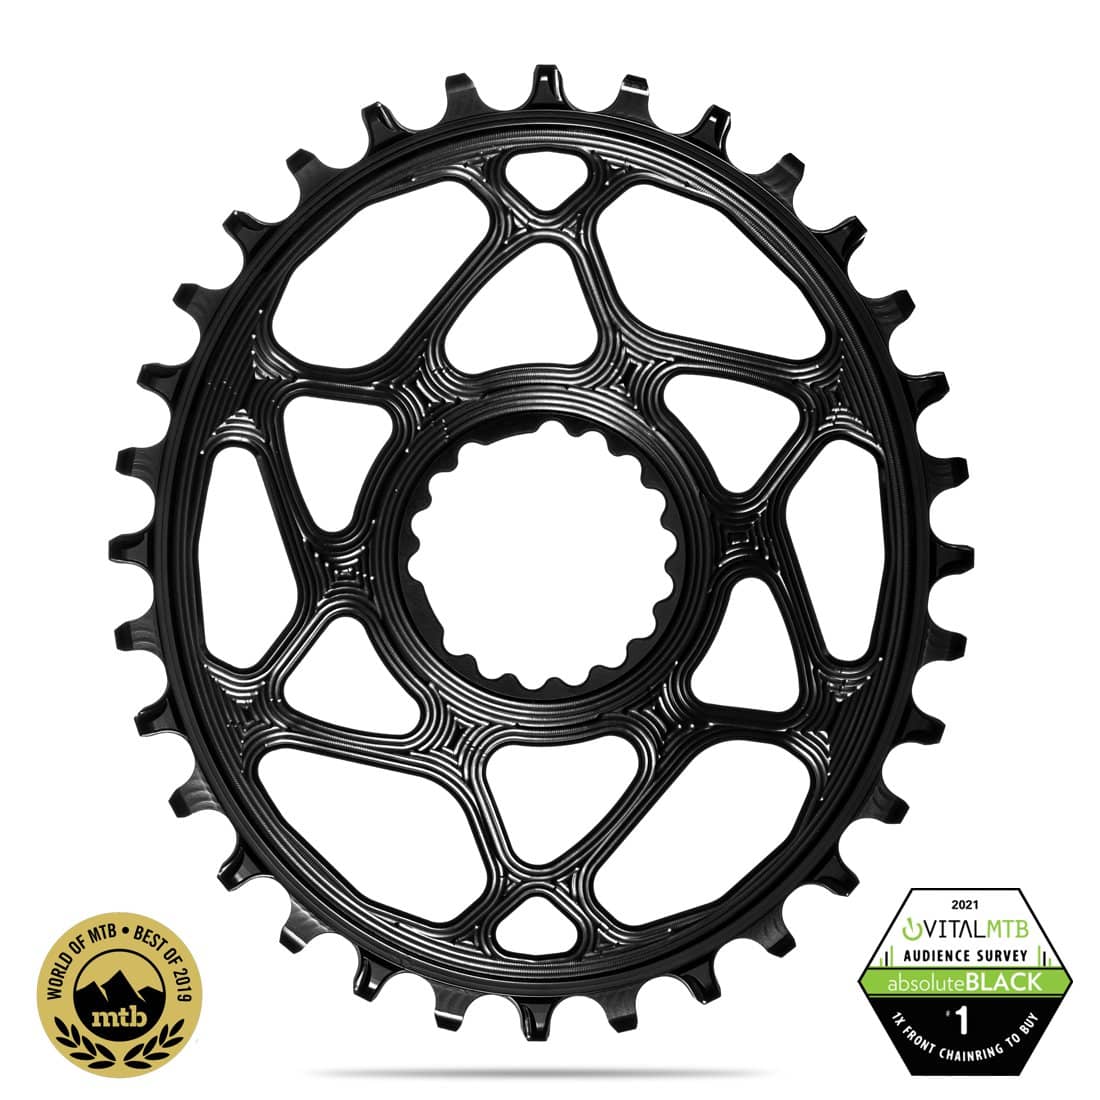 Tradition vores enestående absoluteBLACK | Cannondale OVAL direct mount chainring for F-si